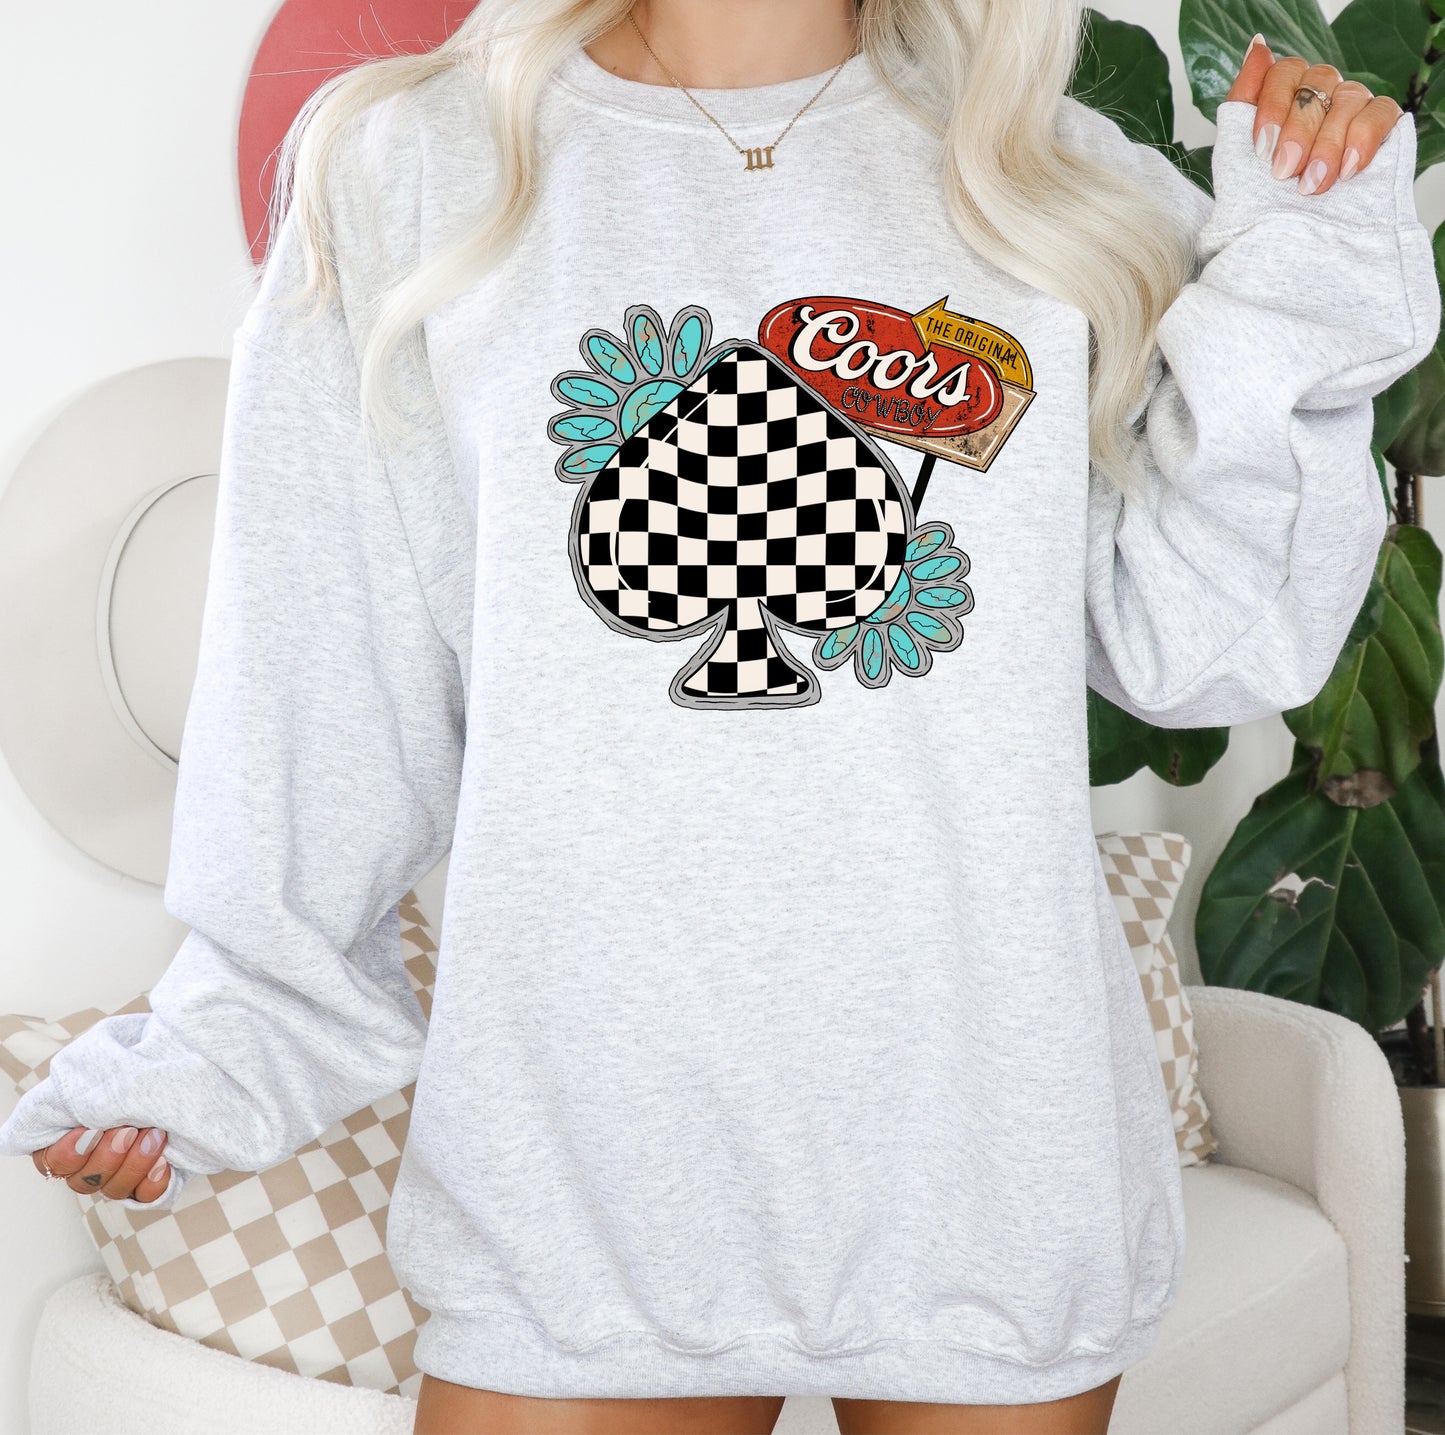 Checkered Spade Coors Graphic Top